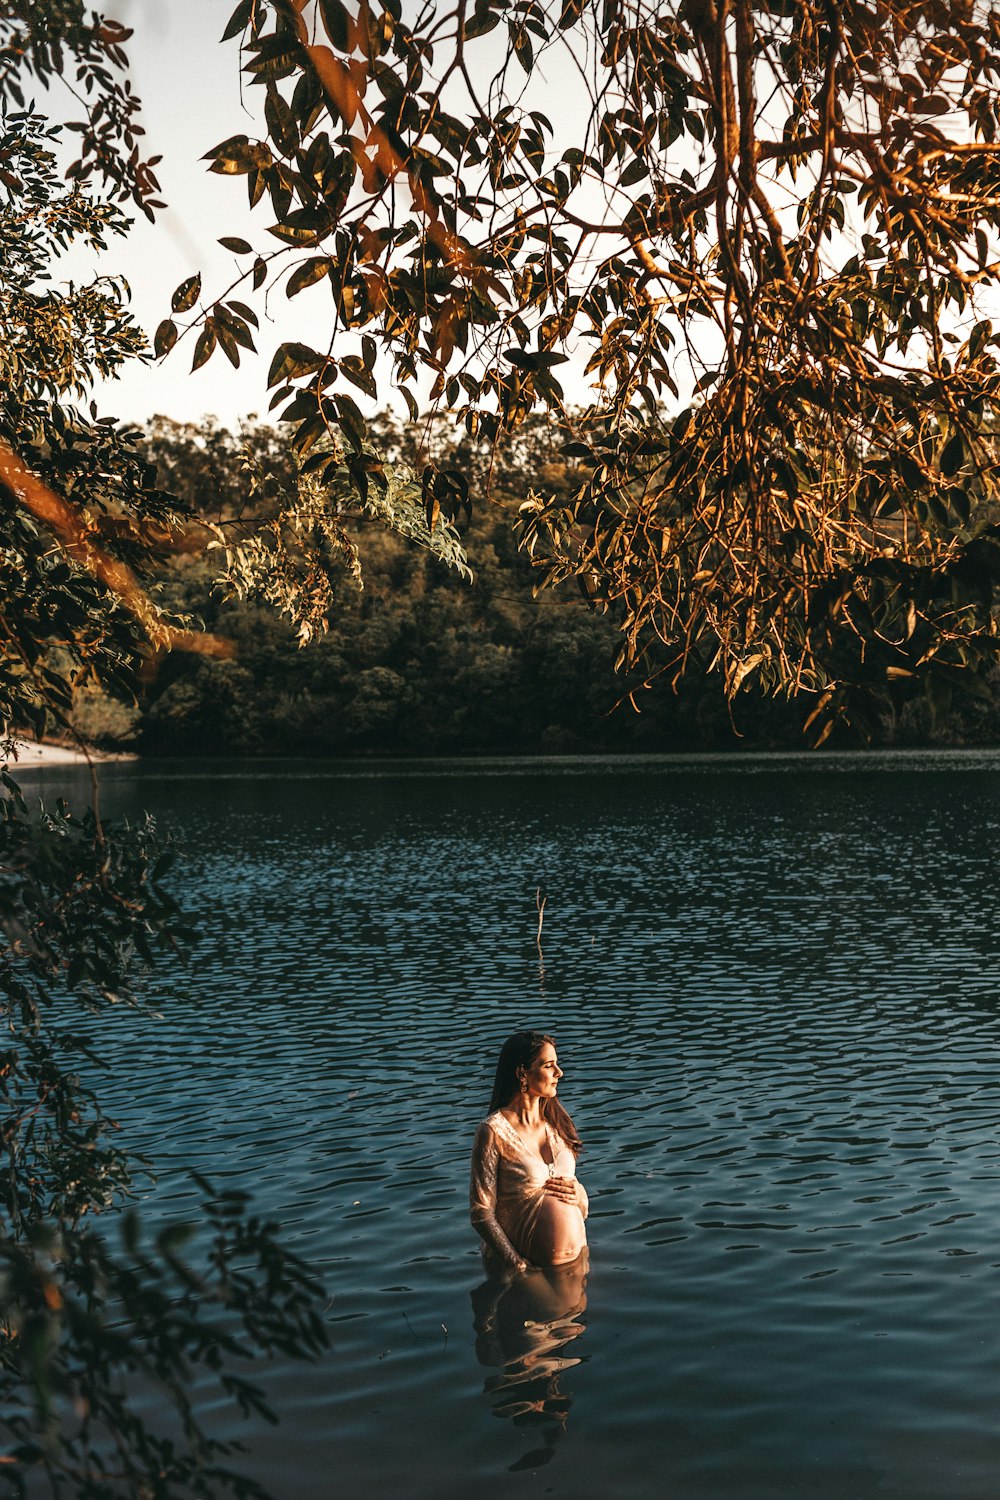 pregnant woman standing in body of water during daytime